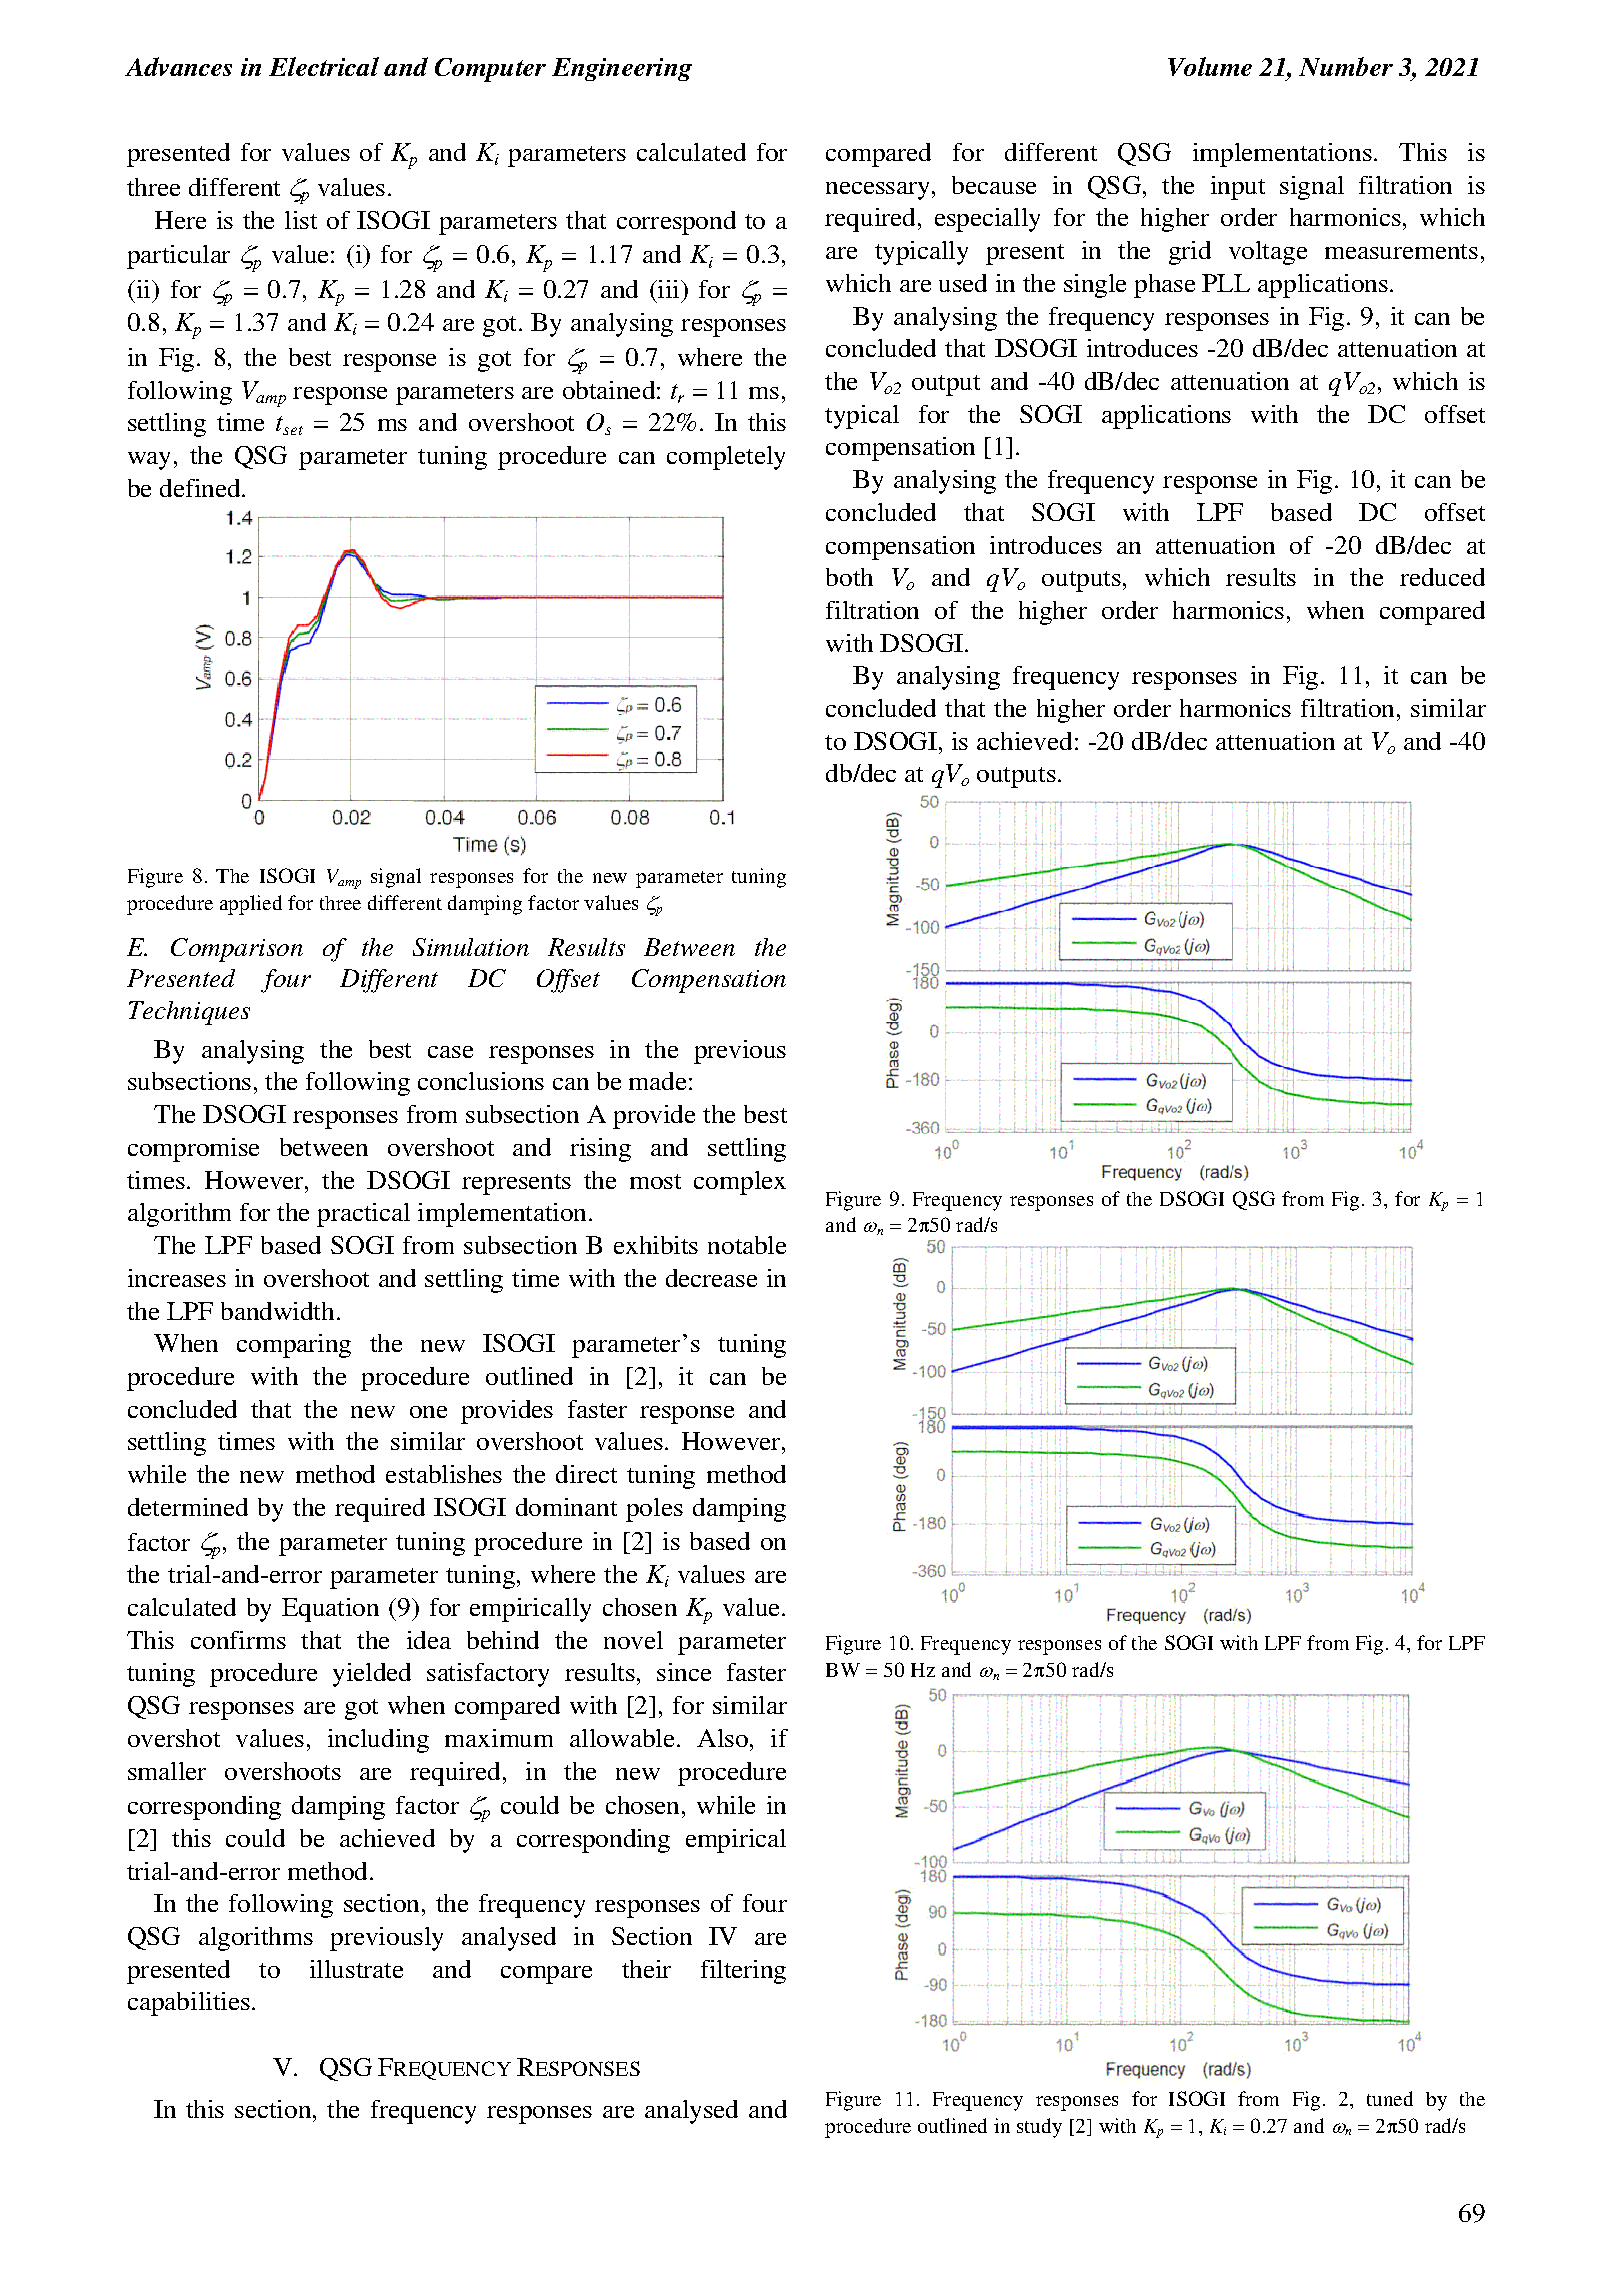 PDF Quickview for paper with DOI:10.4316/AECE.2021.03008